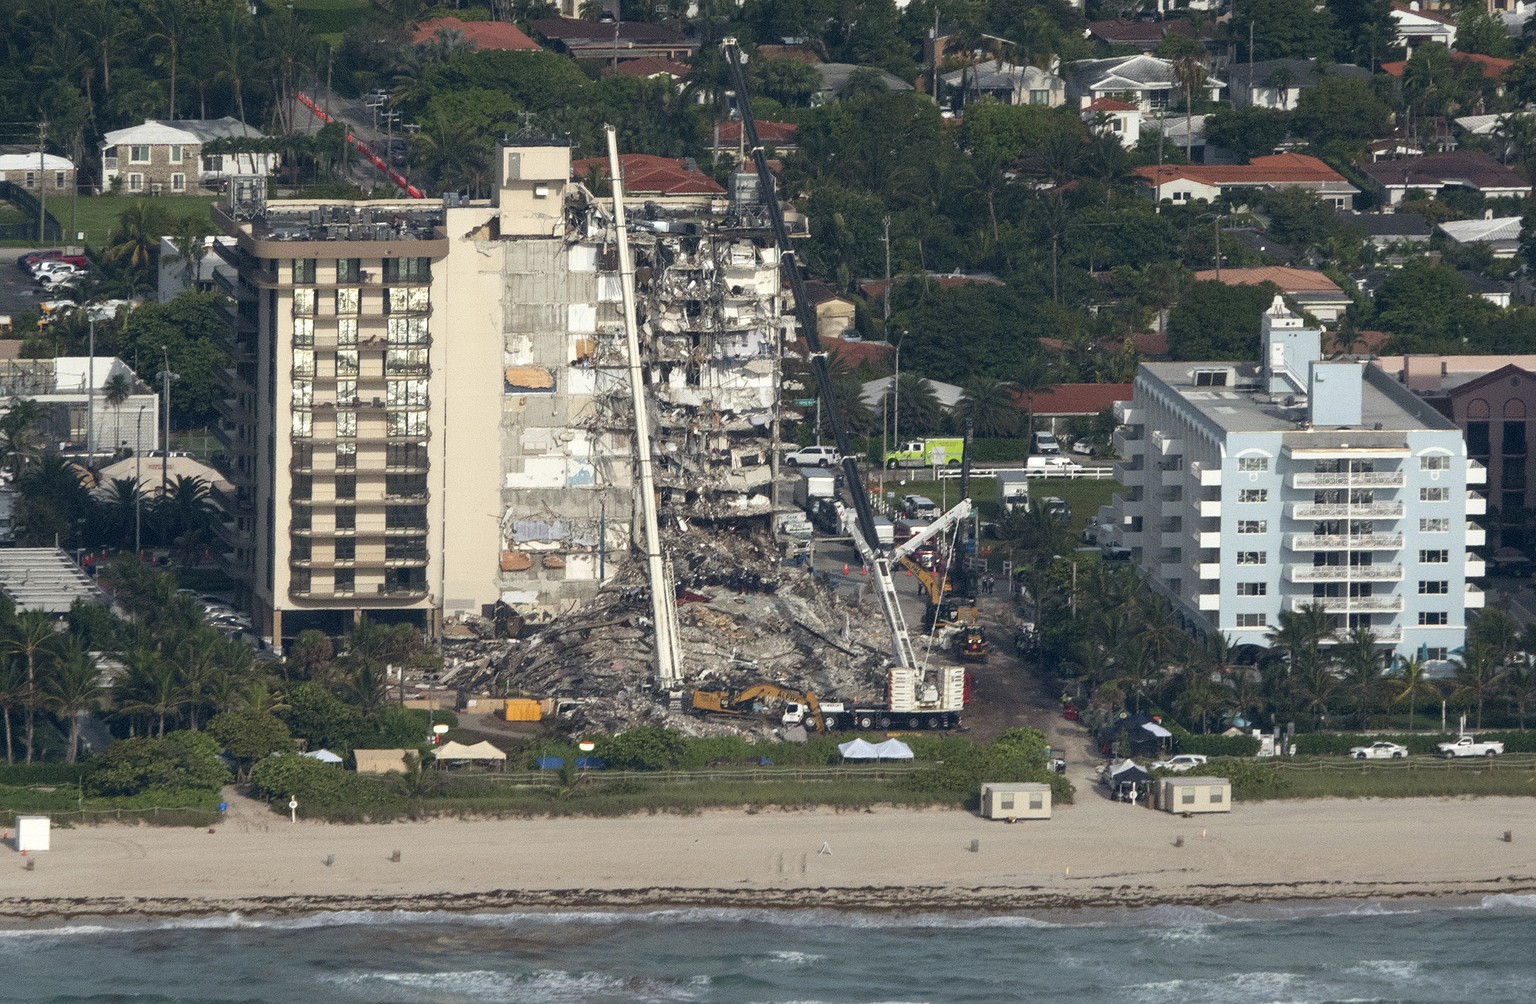 epa09305196 An aerial view of the partial collapsed 12-story condominium building in Surfside, Florida, USA, 27 June 2021. The 12-story beachfront condominium building in the Miami suburb of Surfside, ...